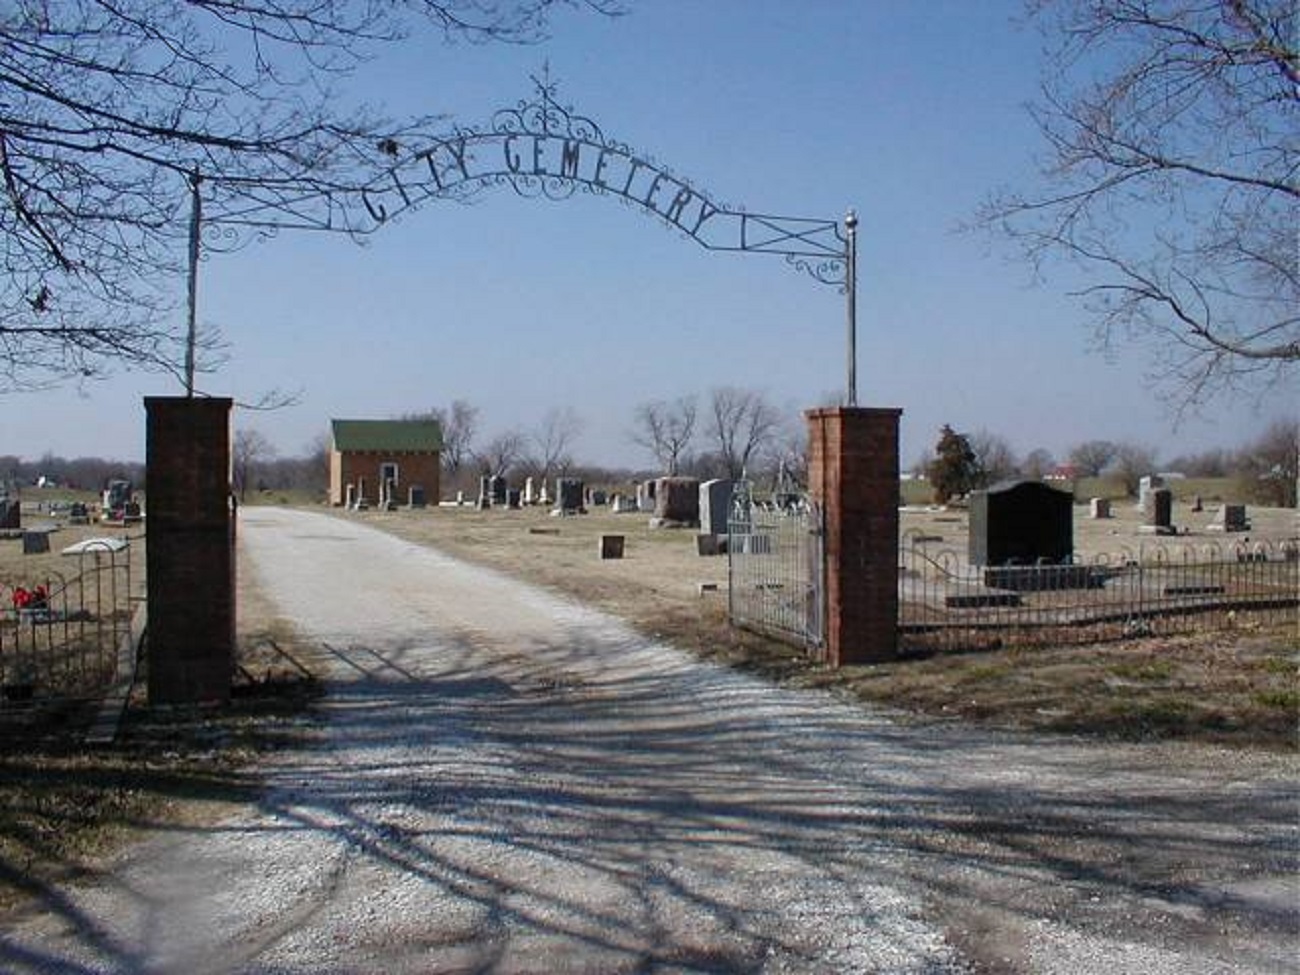 Liberal City Cemetery